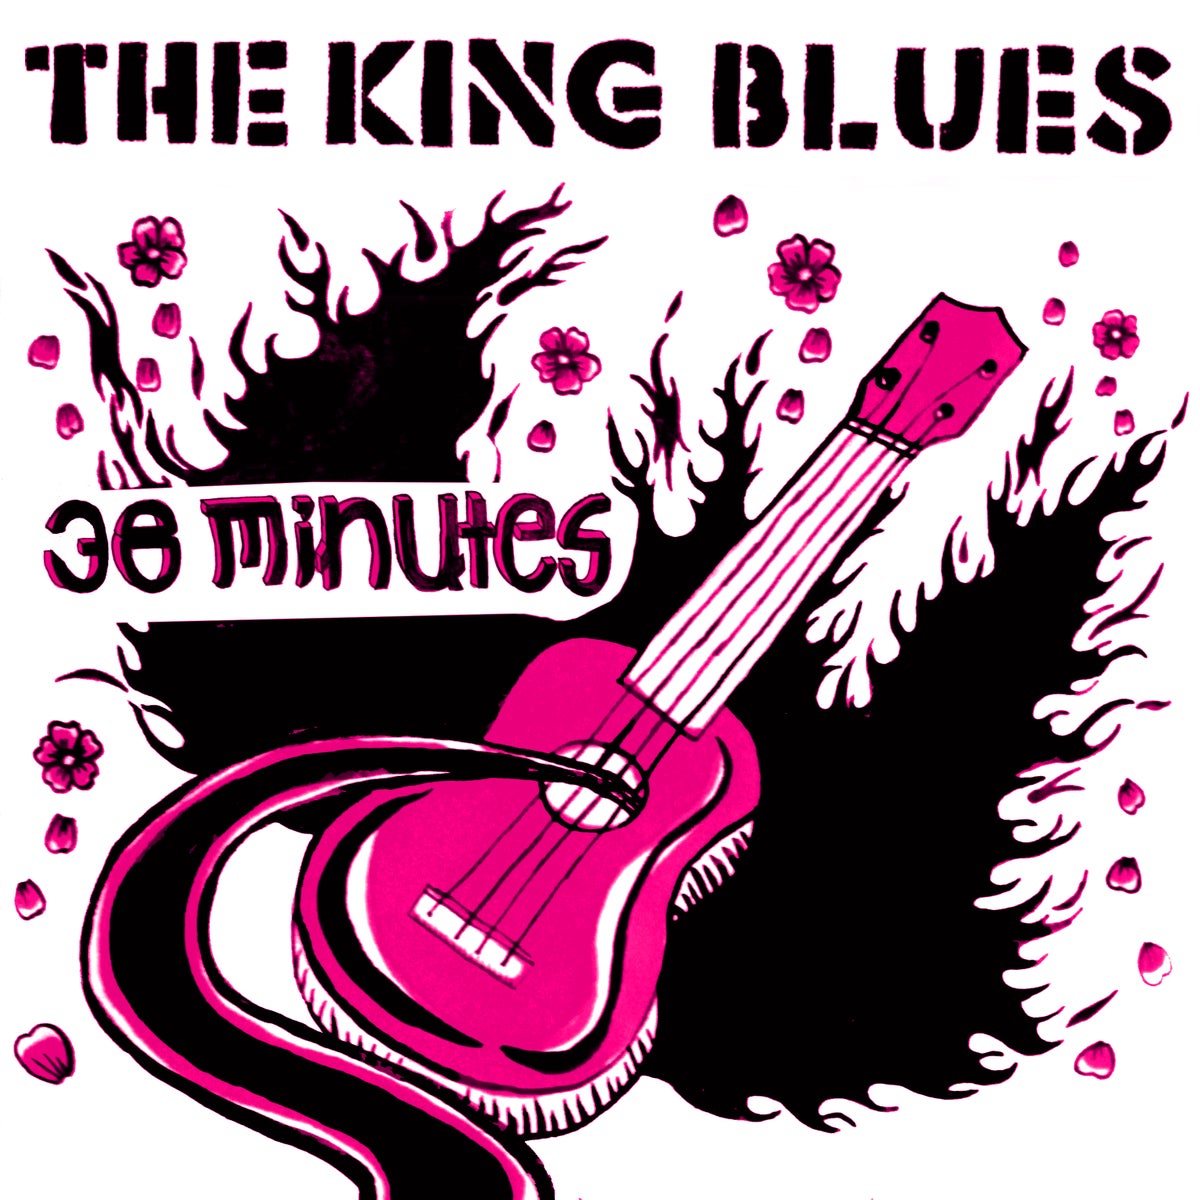 ‘38 Minutes’ by The King Blues, and trying to live one’s fullest life